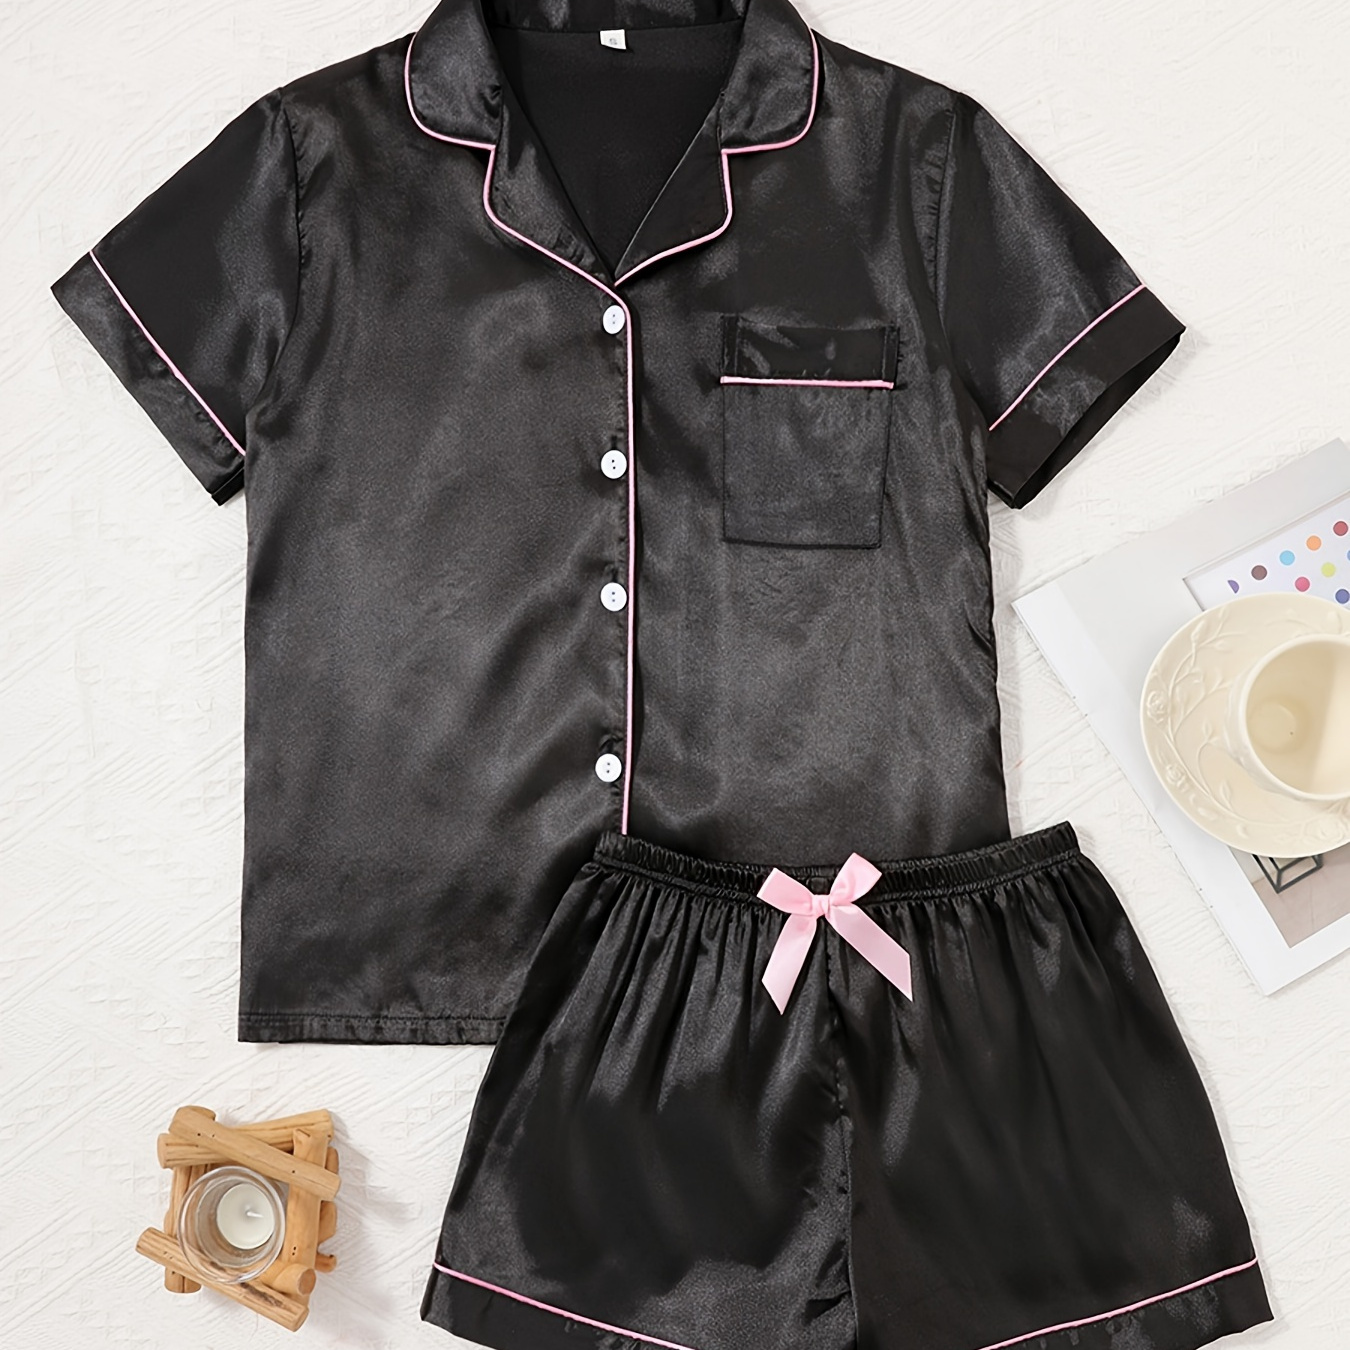 

Women's Solid Satin Casual Pajama Set, Short Sleeve Buttons Lapel Top & Shorts, Comfortable Relaxed Fit